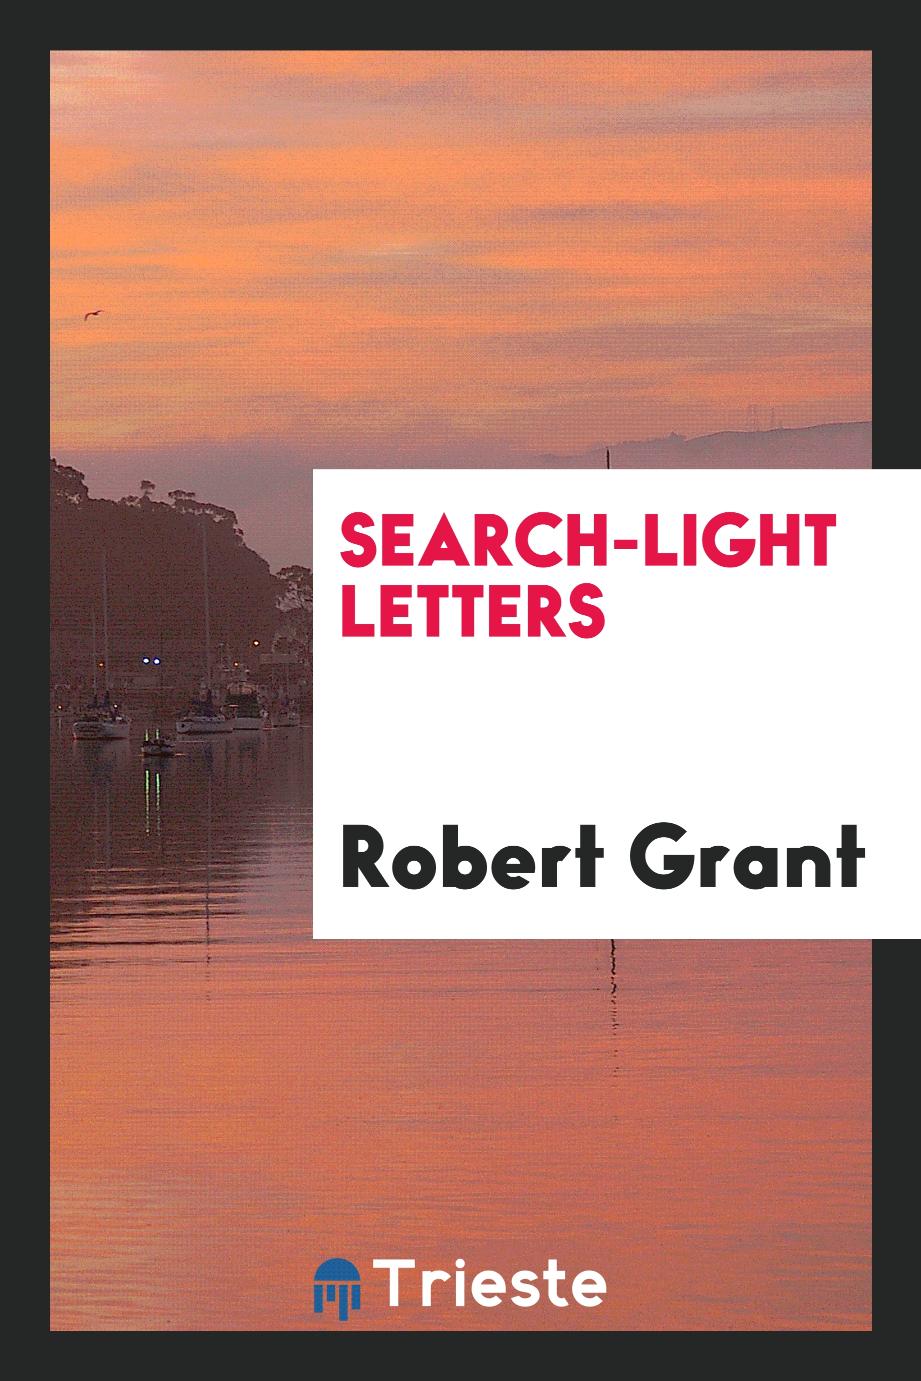 Search-light letters